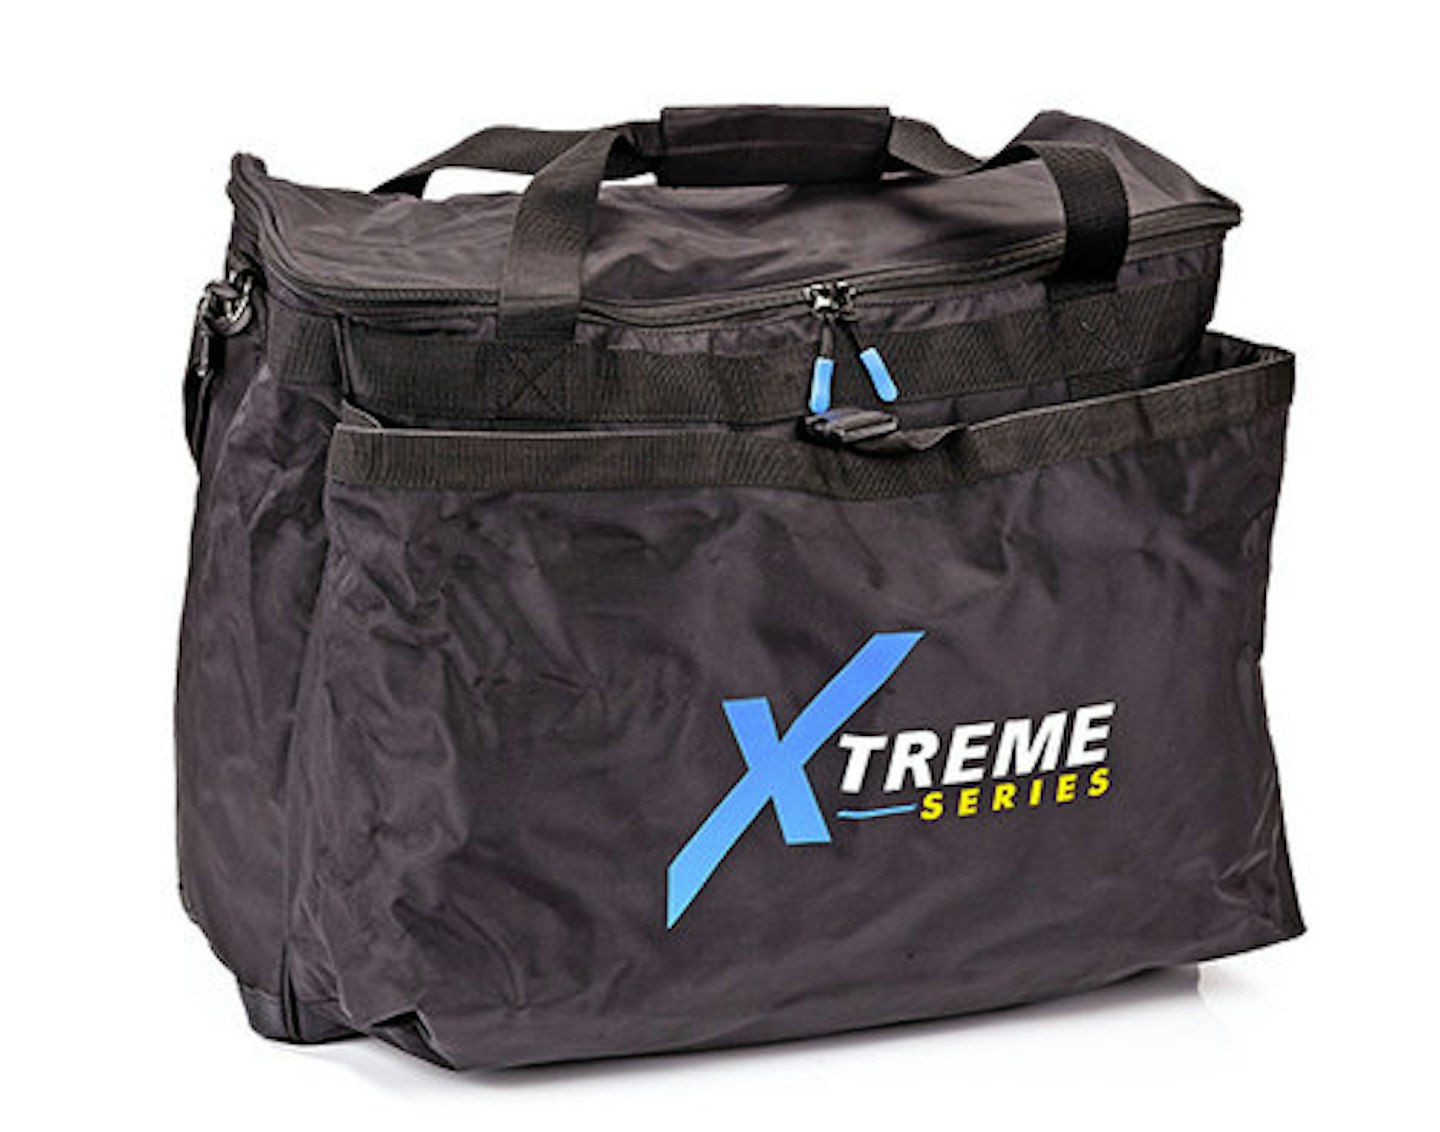 MIDDY XTREME 50-LITRE MATCH CARRYALL, £32.50 